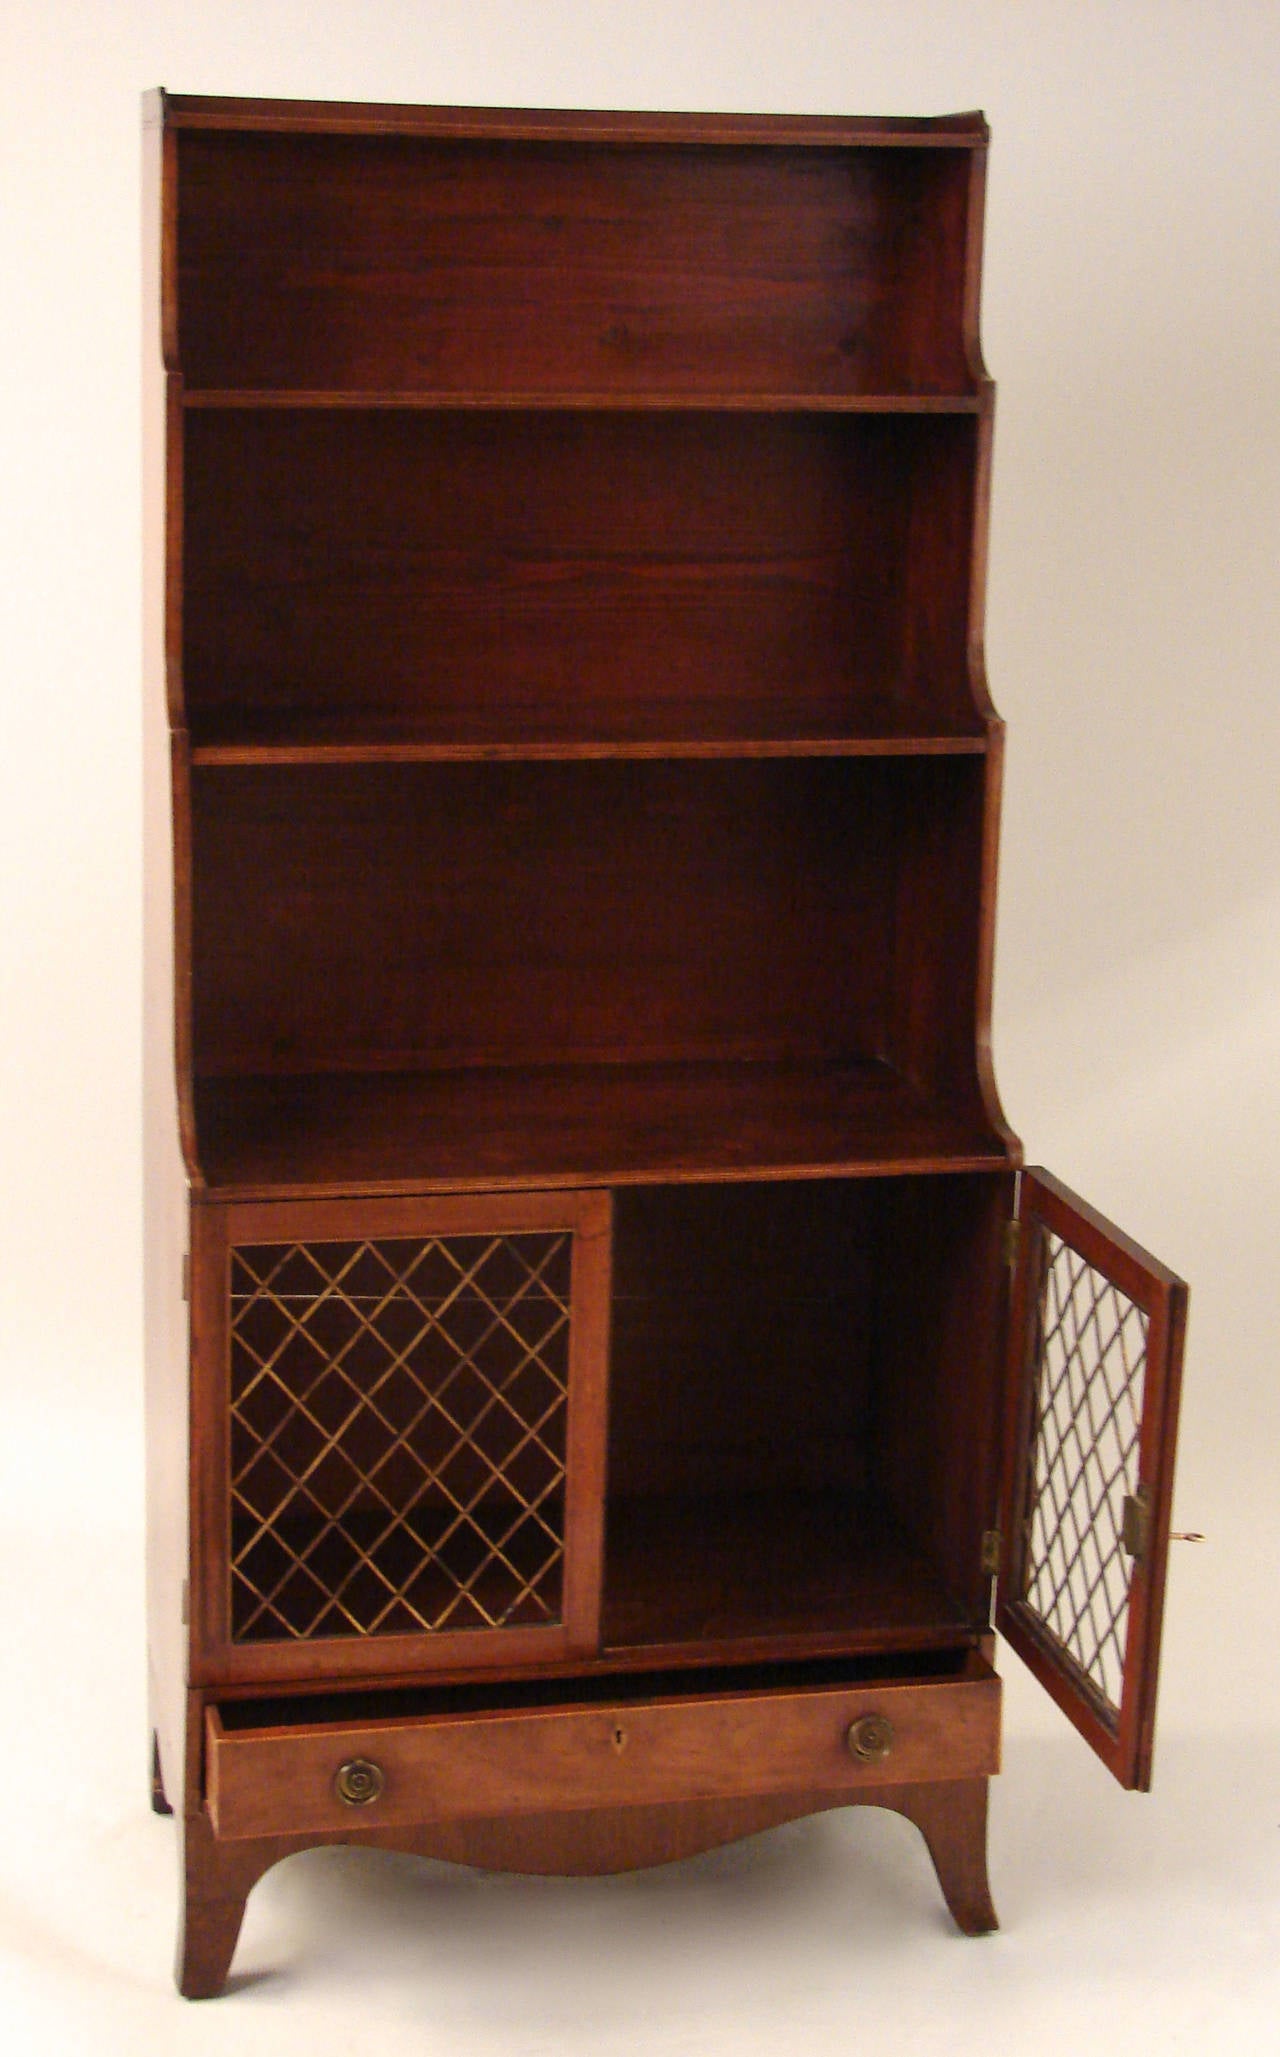 English Regency Waterfall Bookcase with Cabinet and Drawer